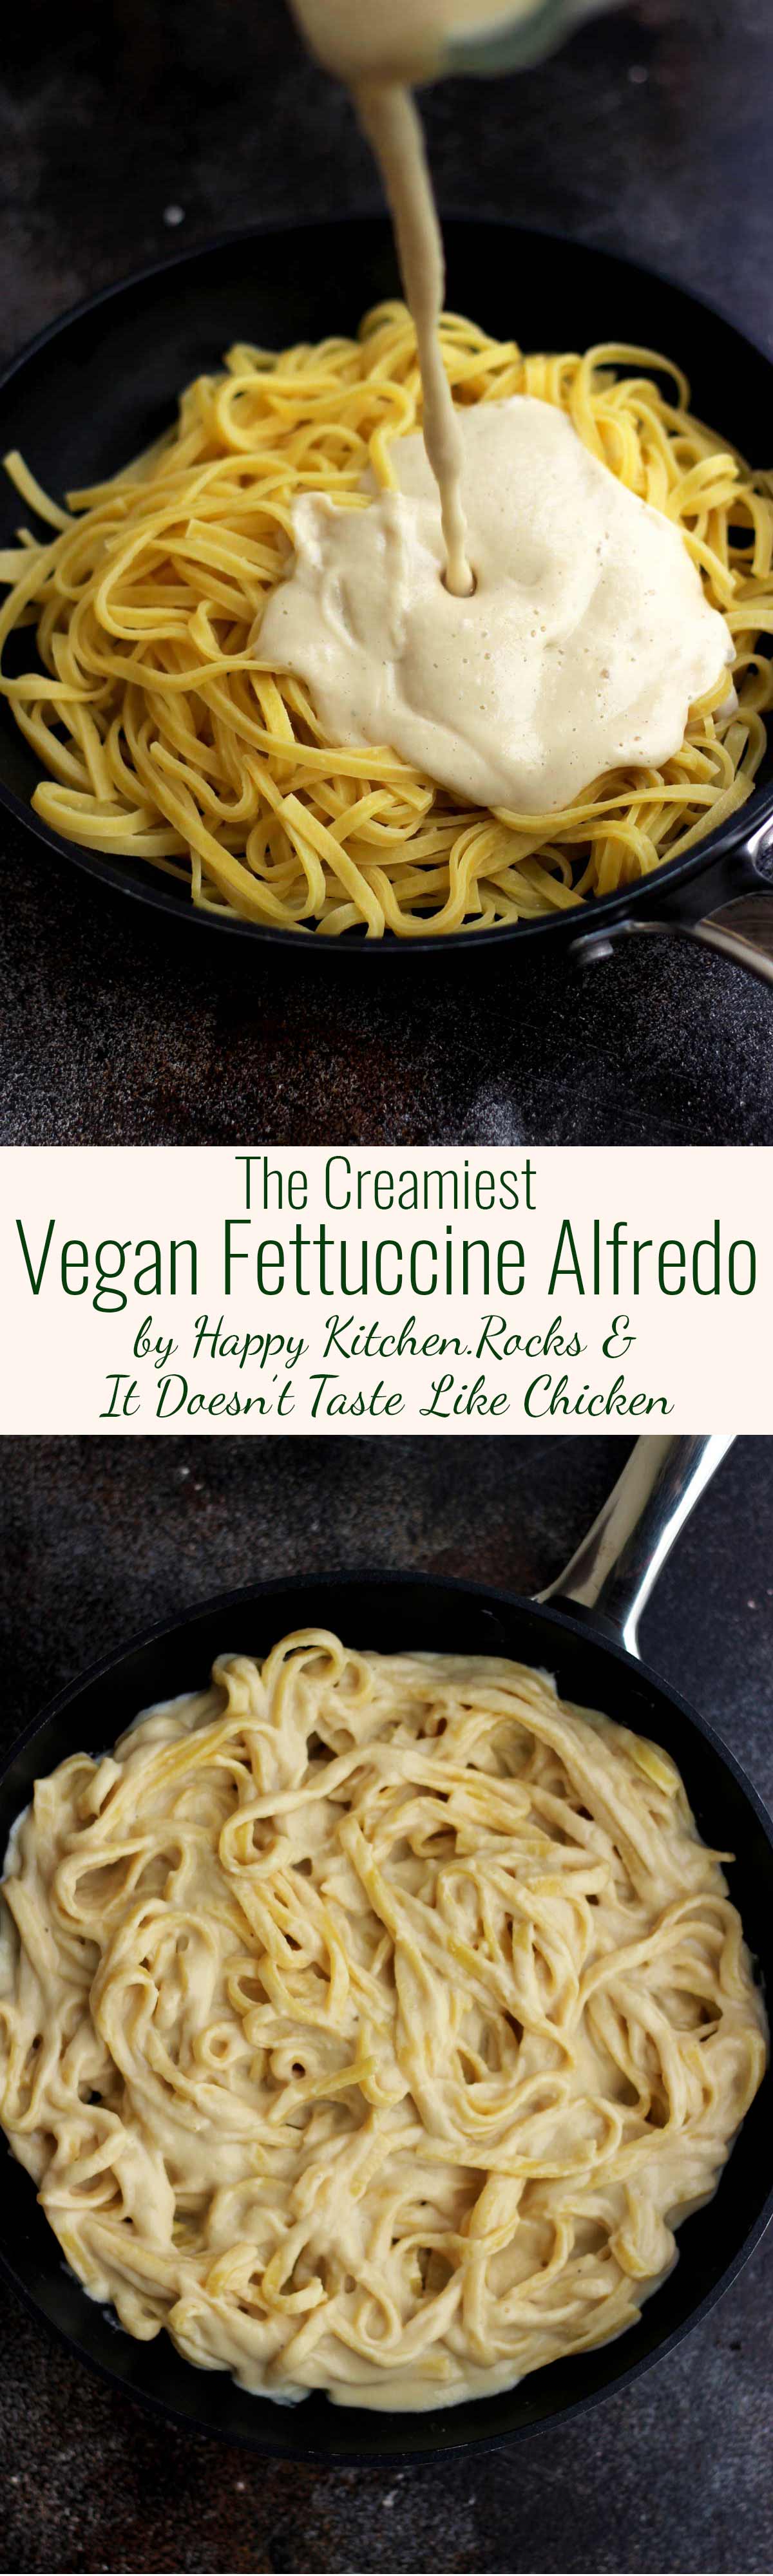 Vegan Fettuccine Alfredo in a Skillet Collage with Two Images and Text Overlay